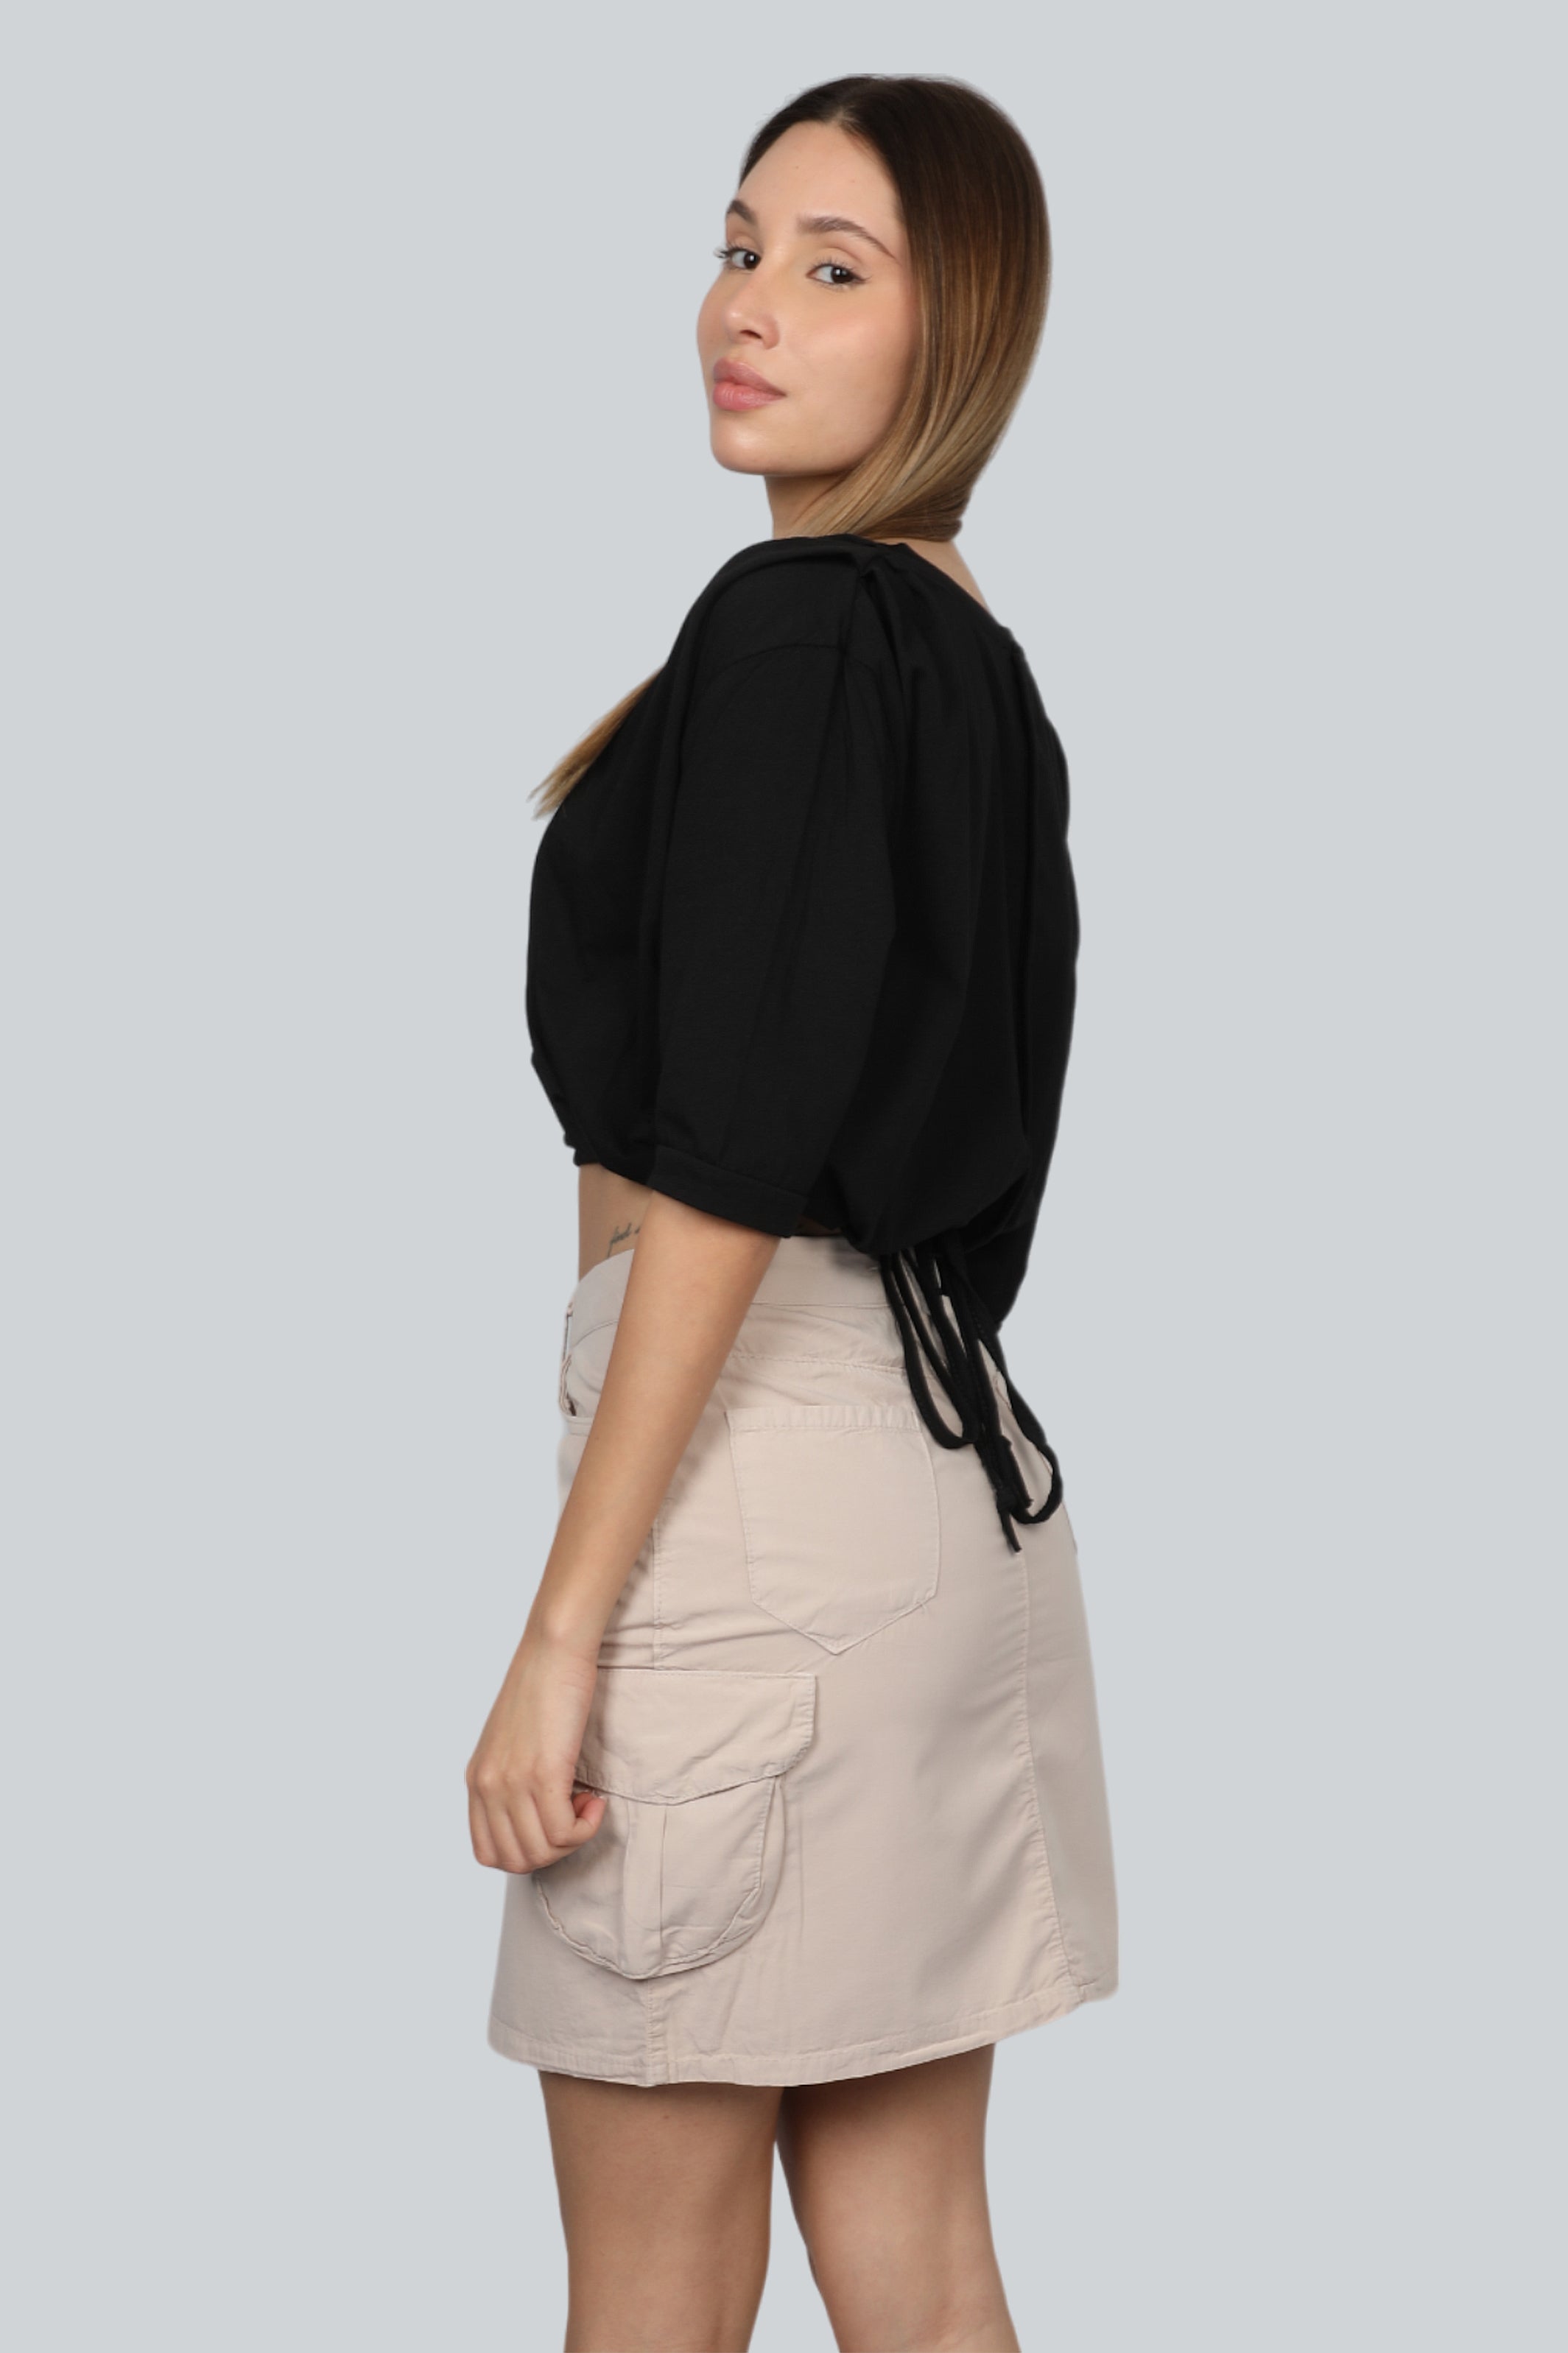 Crop Black T-shirt Short Sleeves With Tie In Back